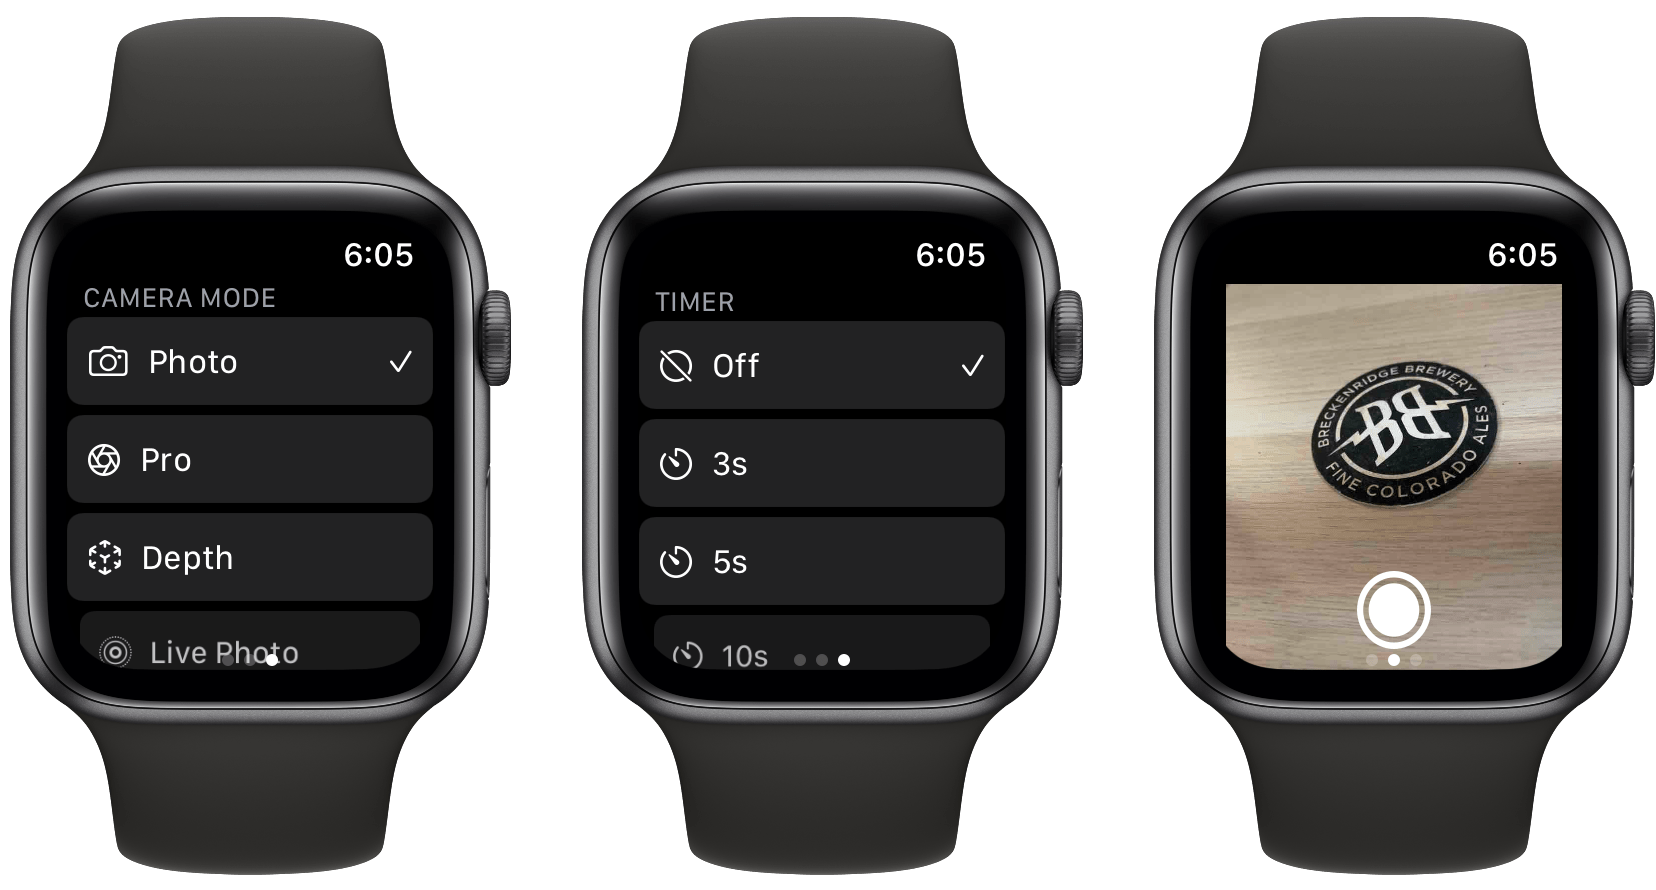 Obscura's excellent Watch app.